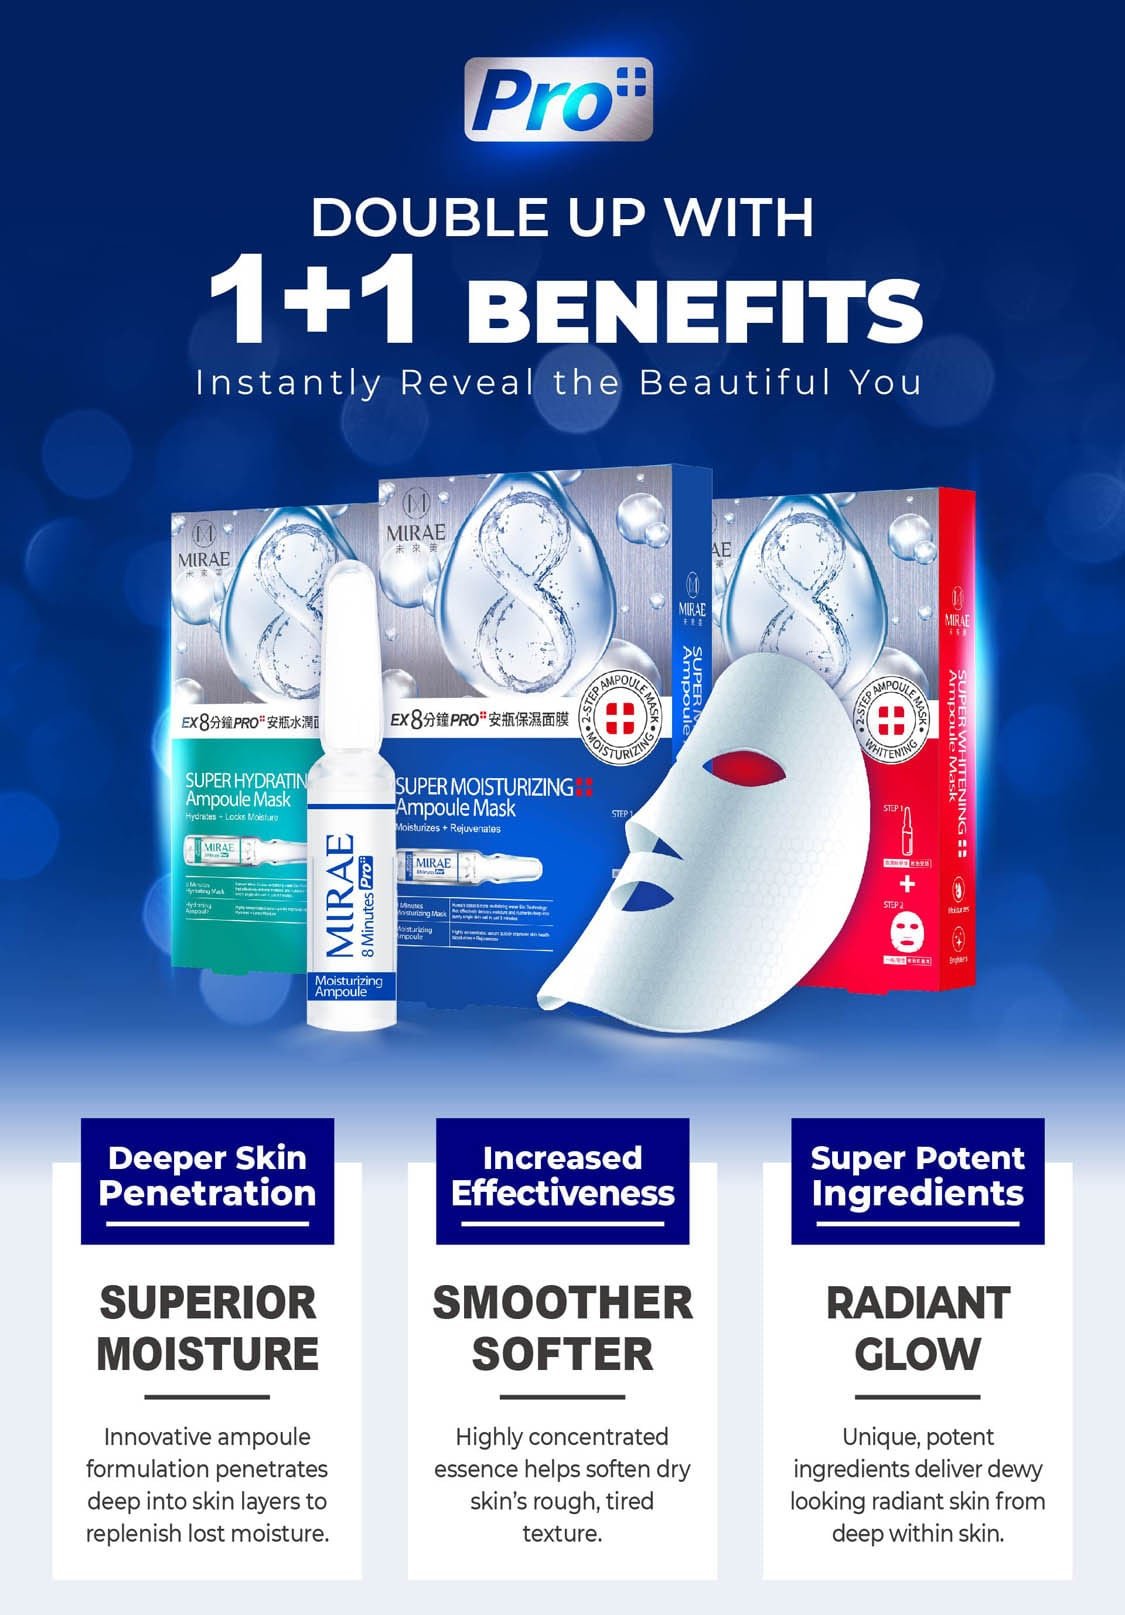 Super Hydrating Ampoule Mask - Benefits